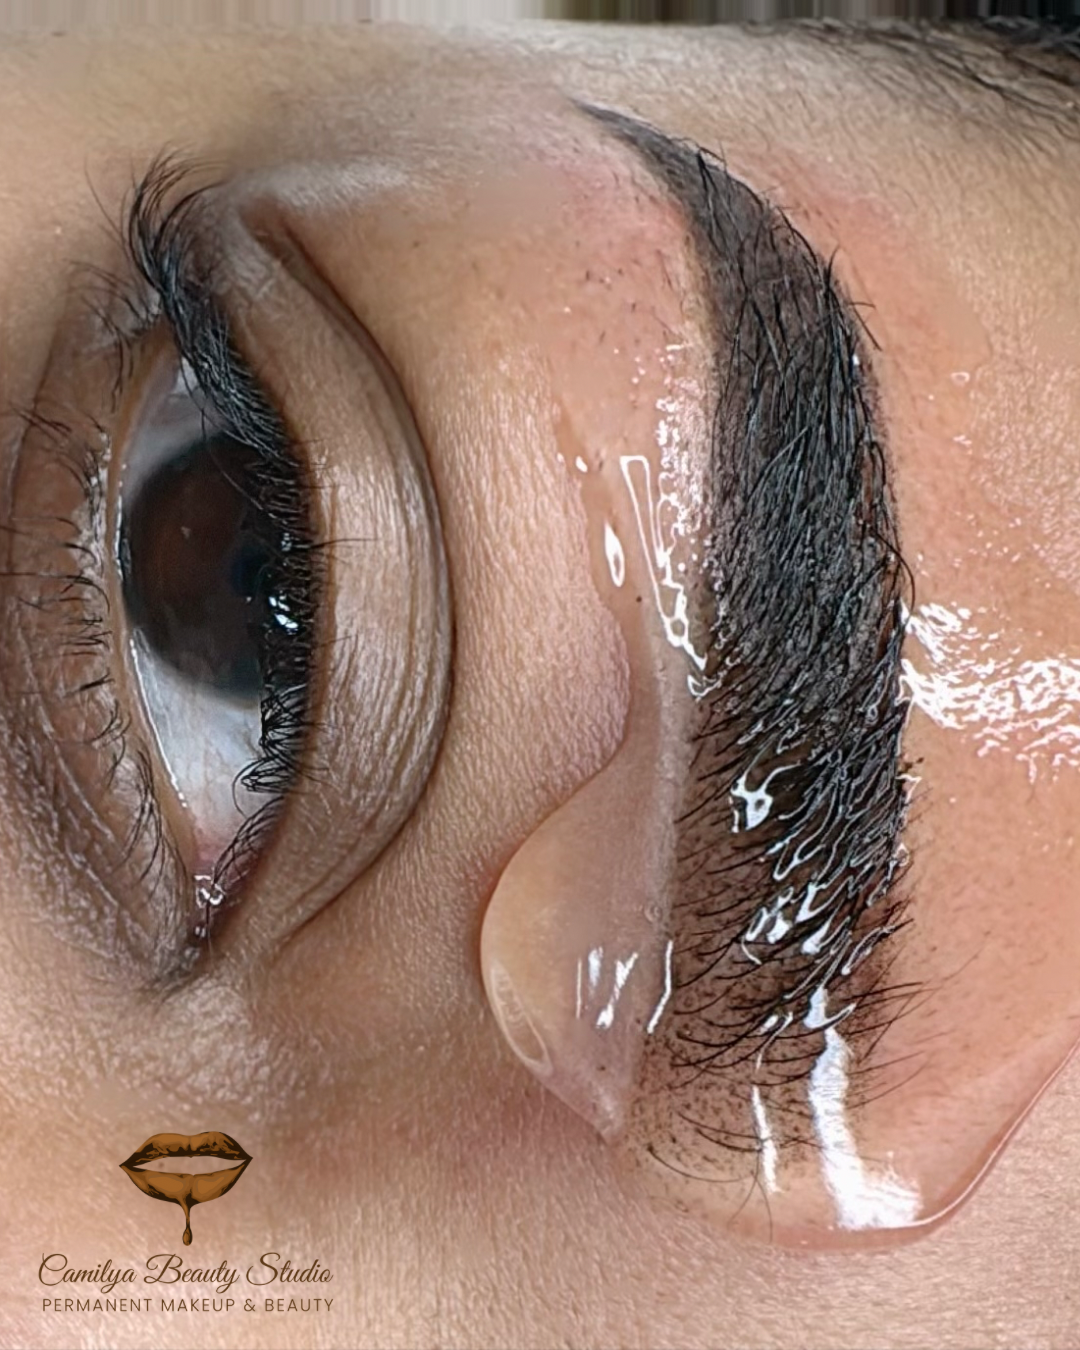 woman getting a permanent makeup treatment on her eyebrow